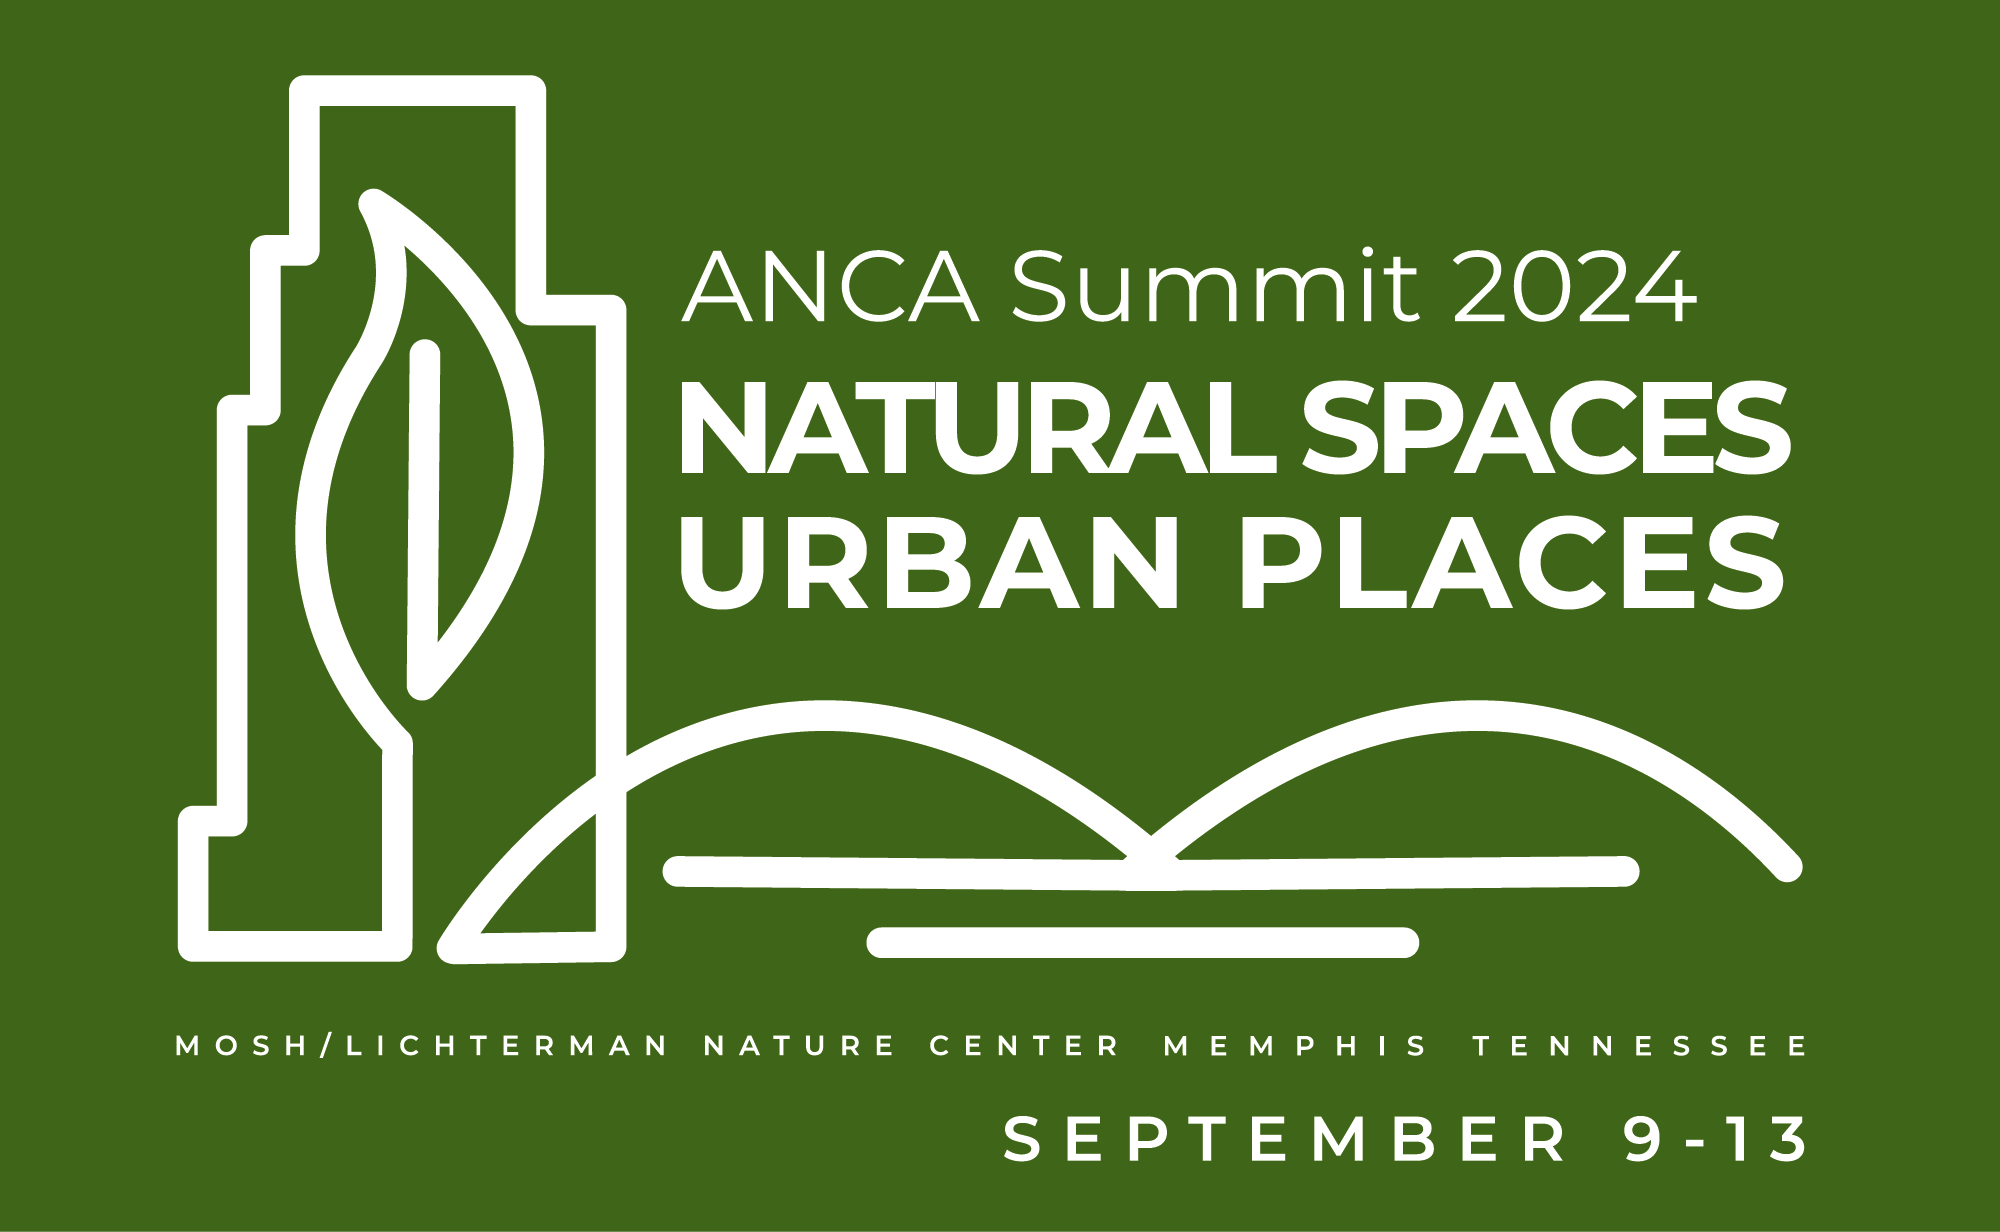 ANCA Summit 2024: Natural Spaces, Urban Places | MOSH / Lichterman Nature Center / Memphis Tennessee | September 9-13